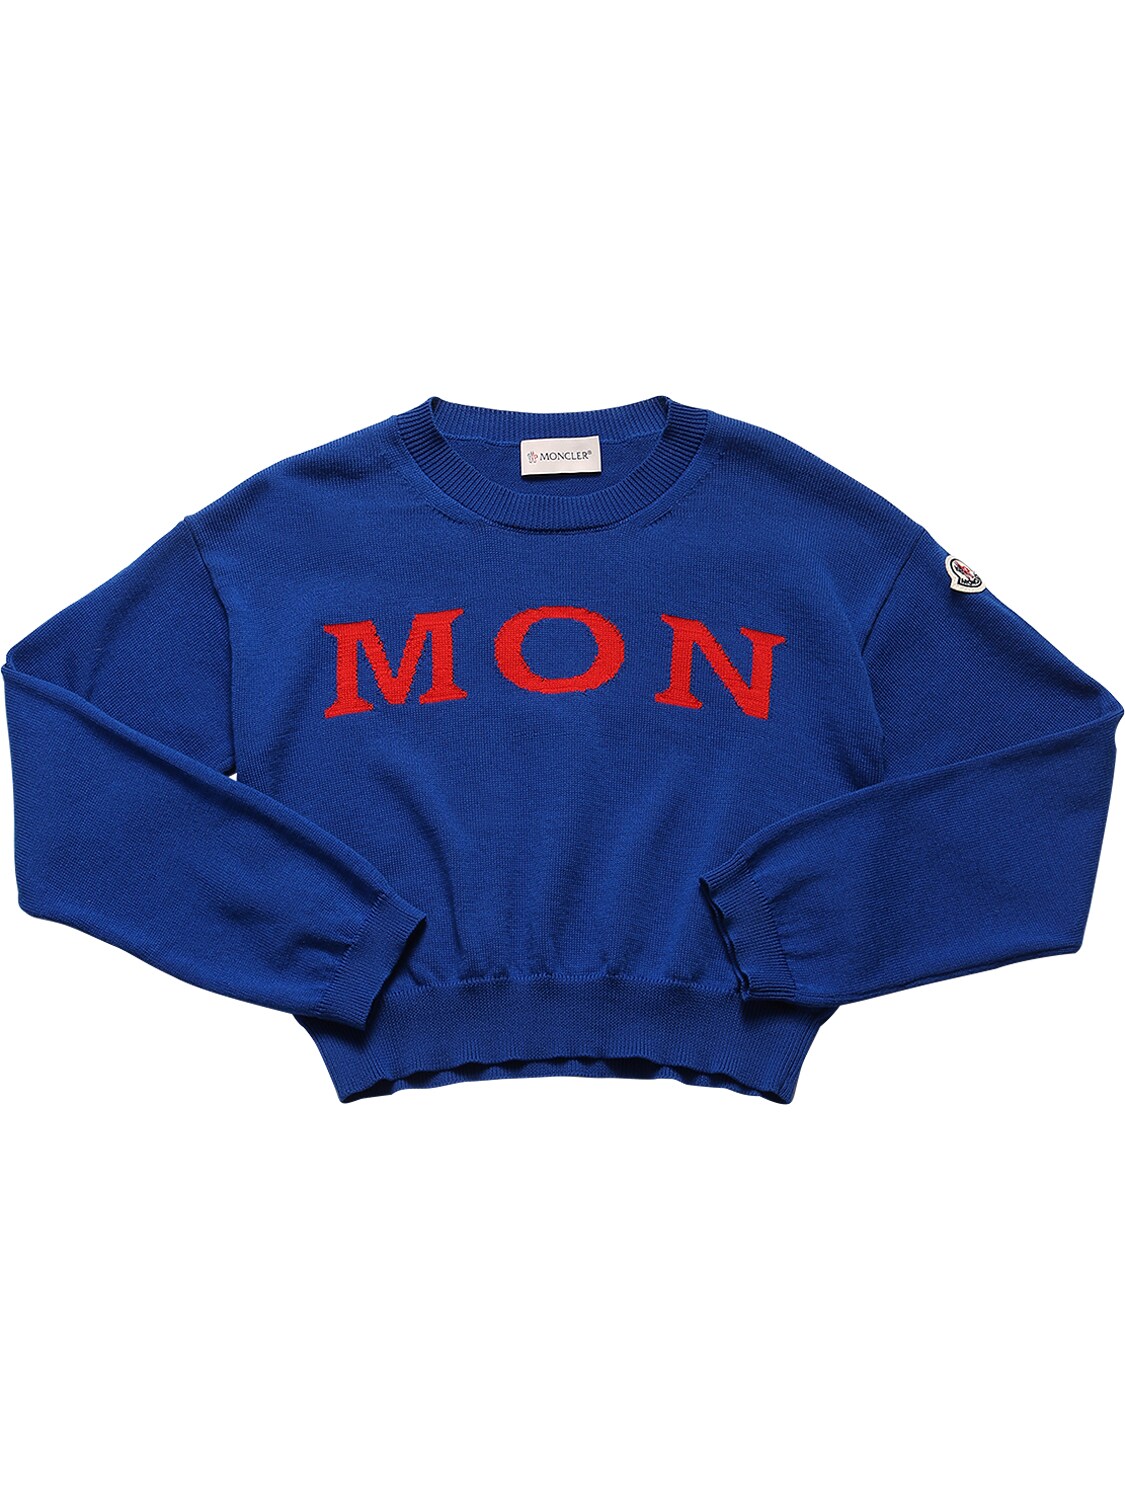 MONCLER LOGO INTARSIA COTTON KNIT SWEATER,69IFGT056-NZY10